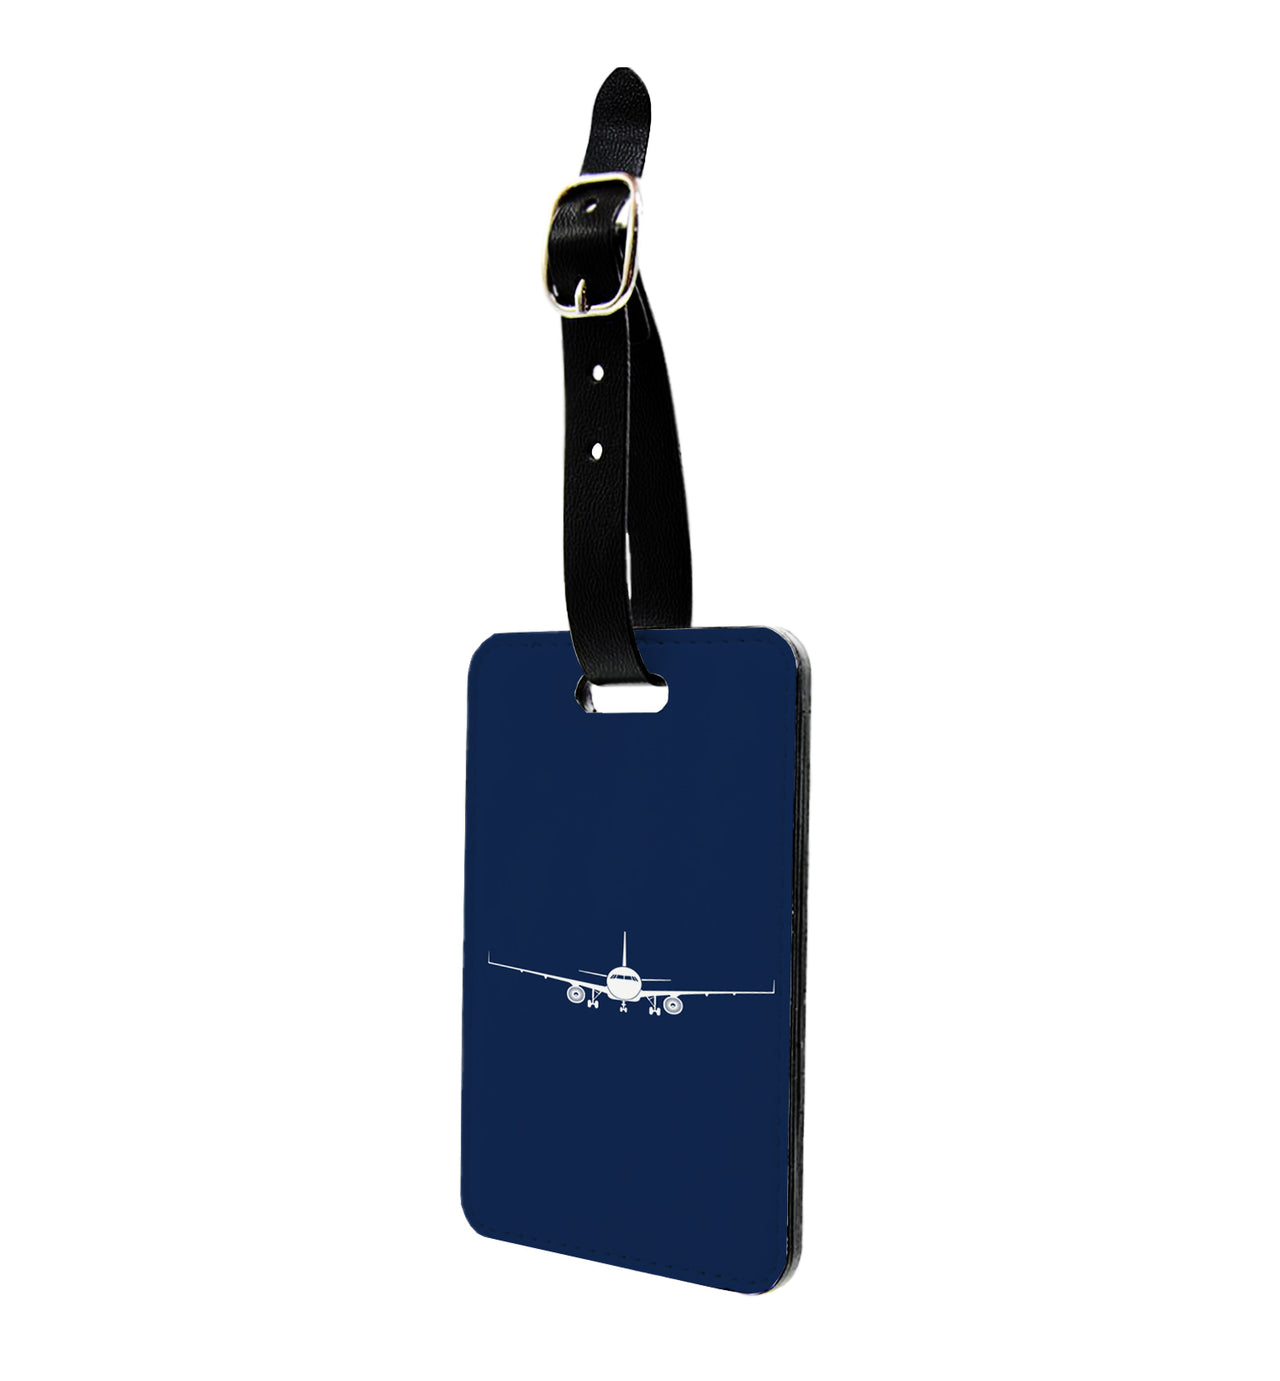 Airbus A320 Silhouette Designed Luggage Tag